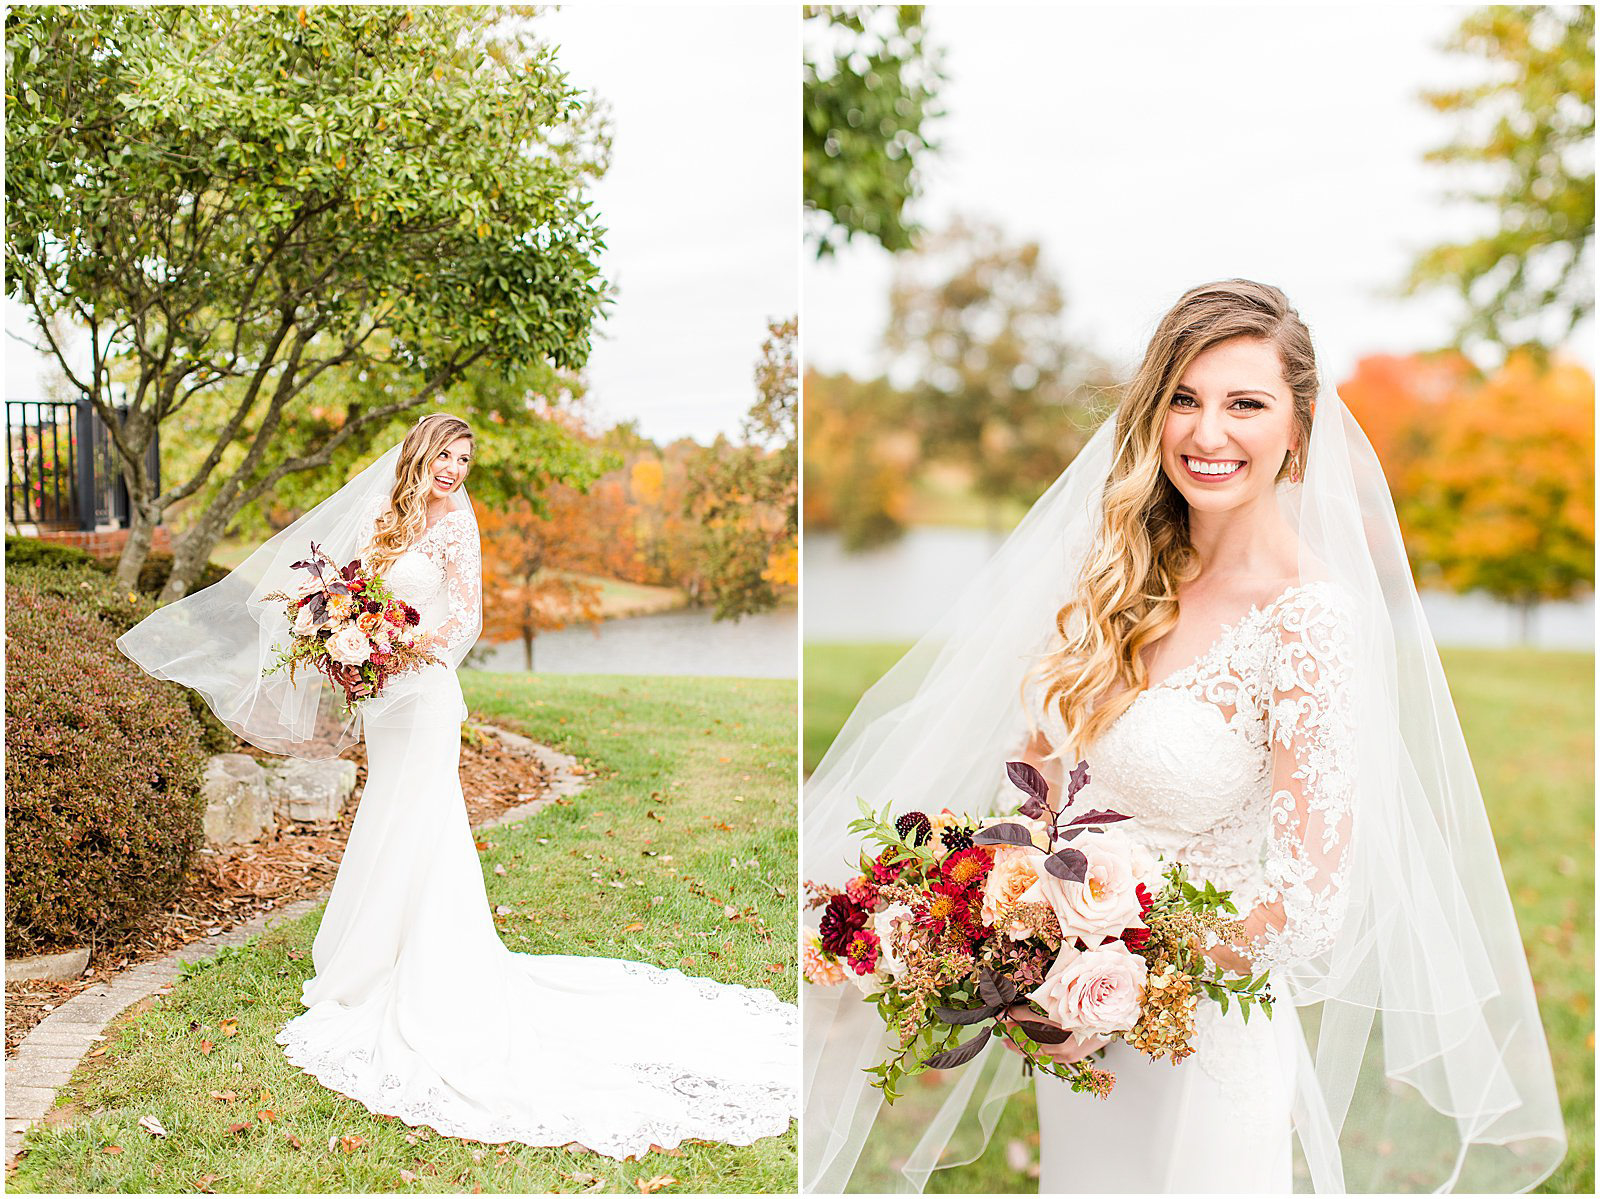 A Romantic Fall Wedding in Ferdinand, IN | Tori and Kyle | Bret and Brandie Photography 0067.jpg